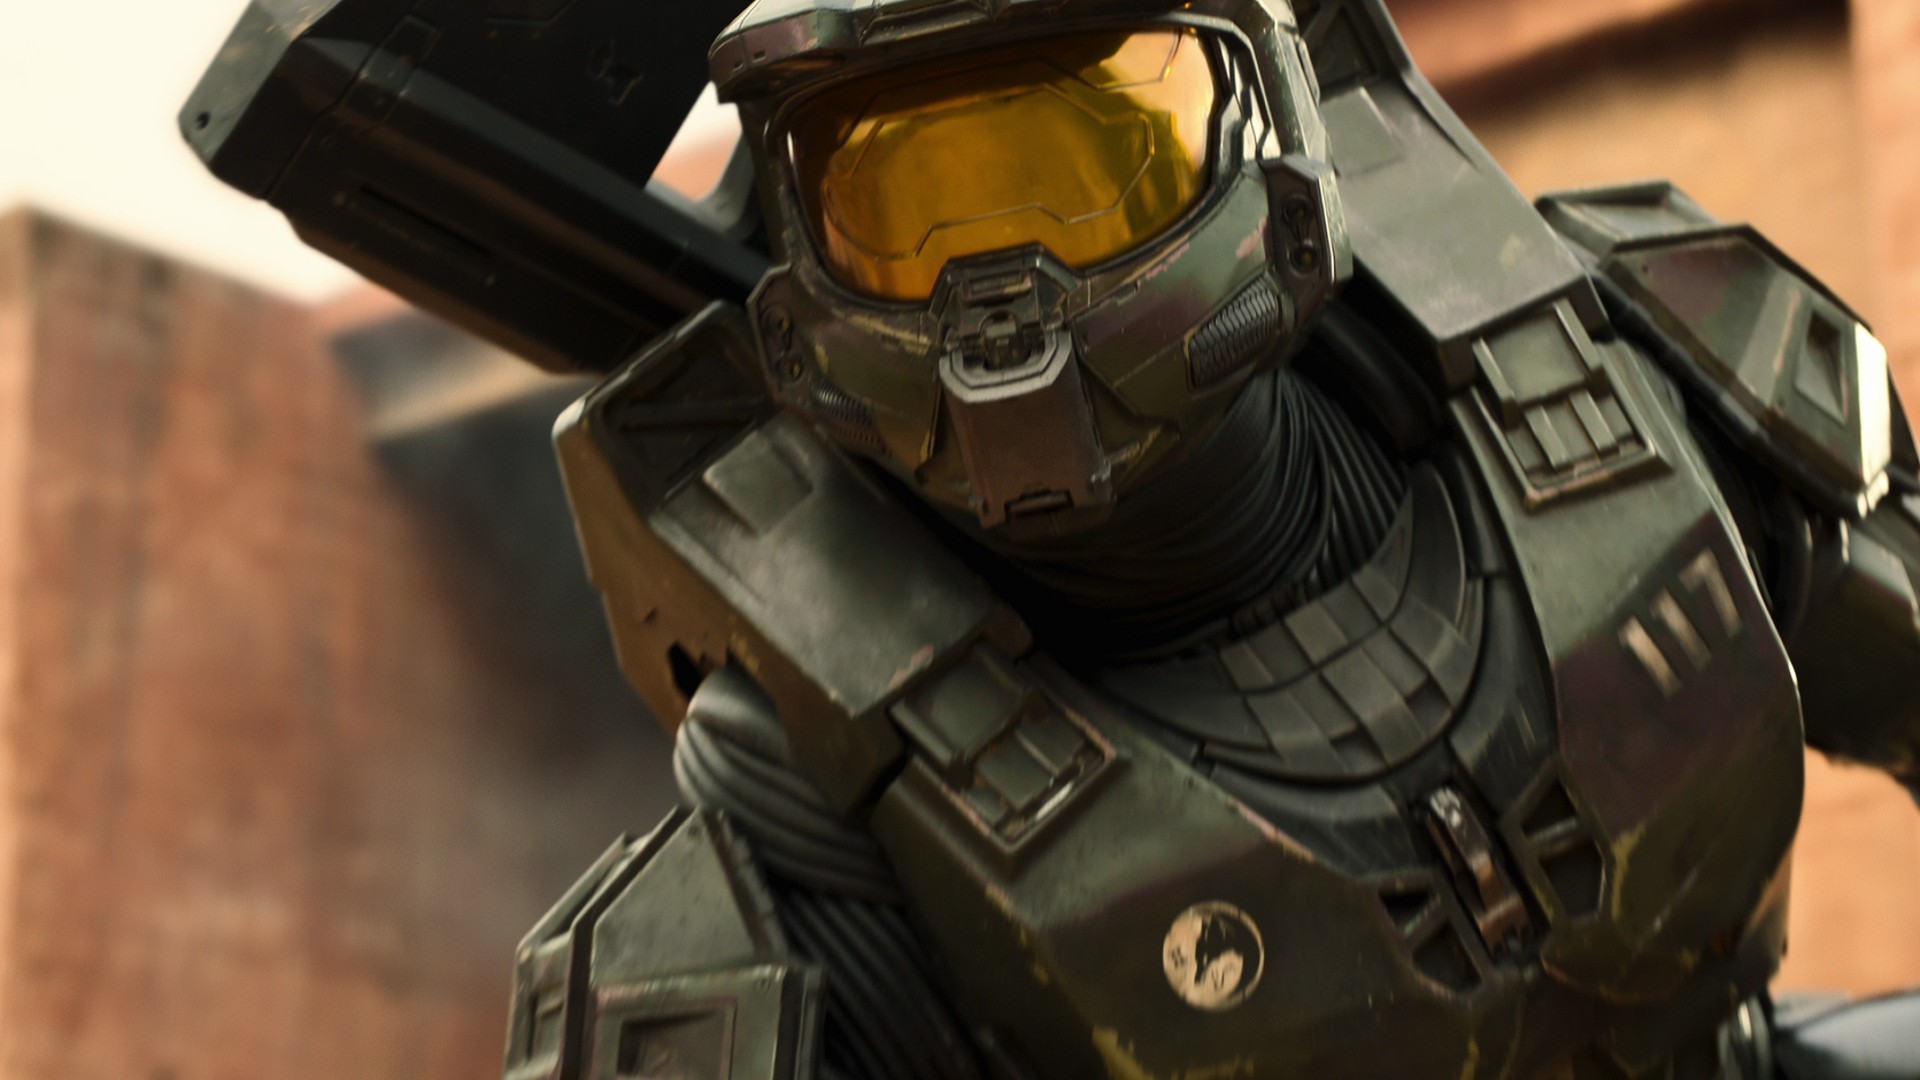 Halo episode 8 review: “Tees the show up for an explosive finale”ByBradley Russellpublished 12 May 22Review